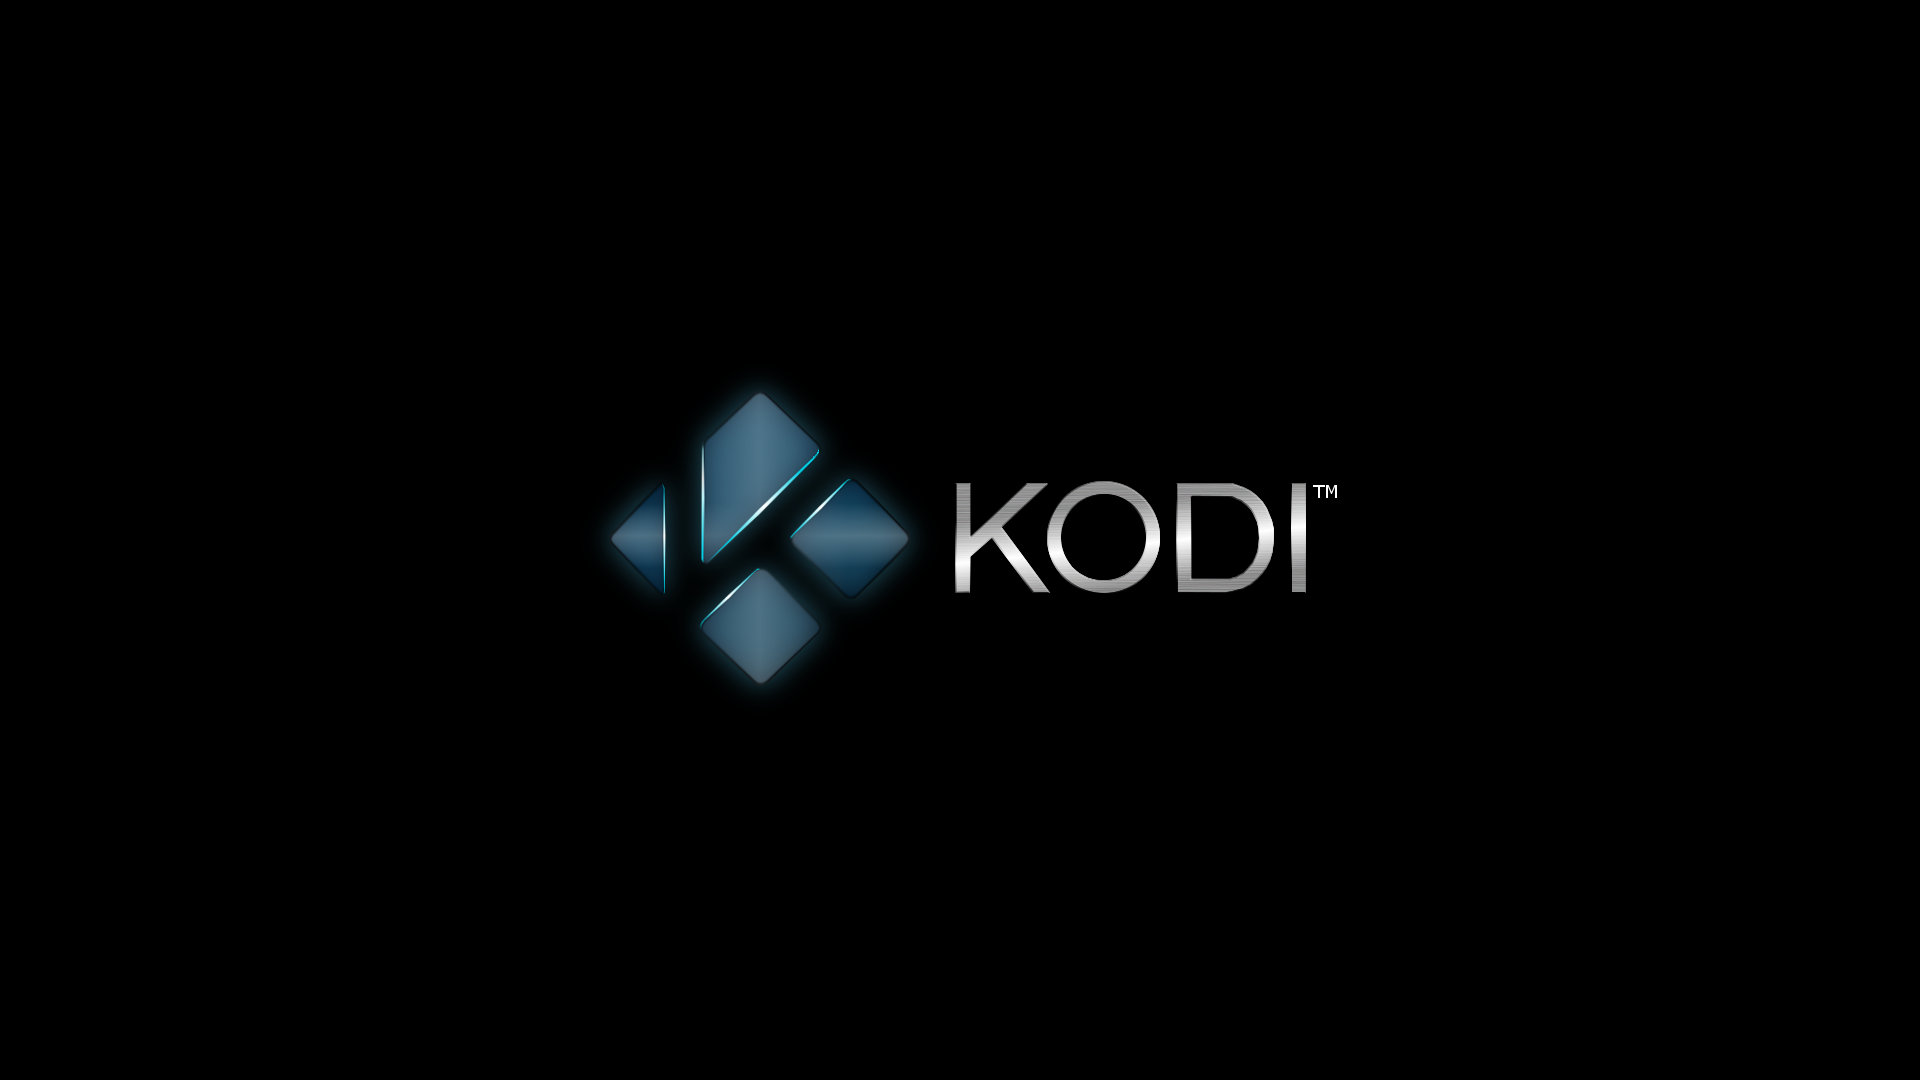 See BeautifulHD Wallpaper Kodi Photos Image And Pics Shared By Our